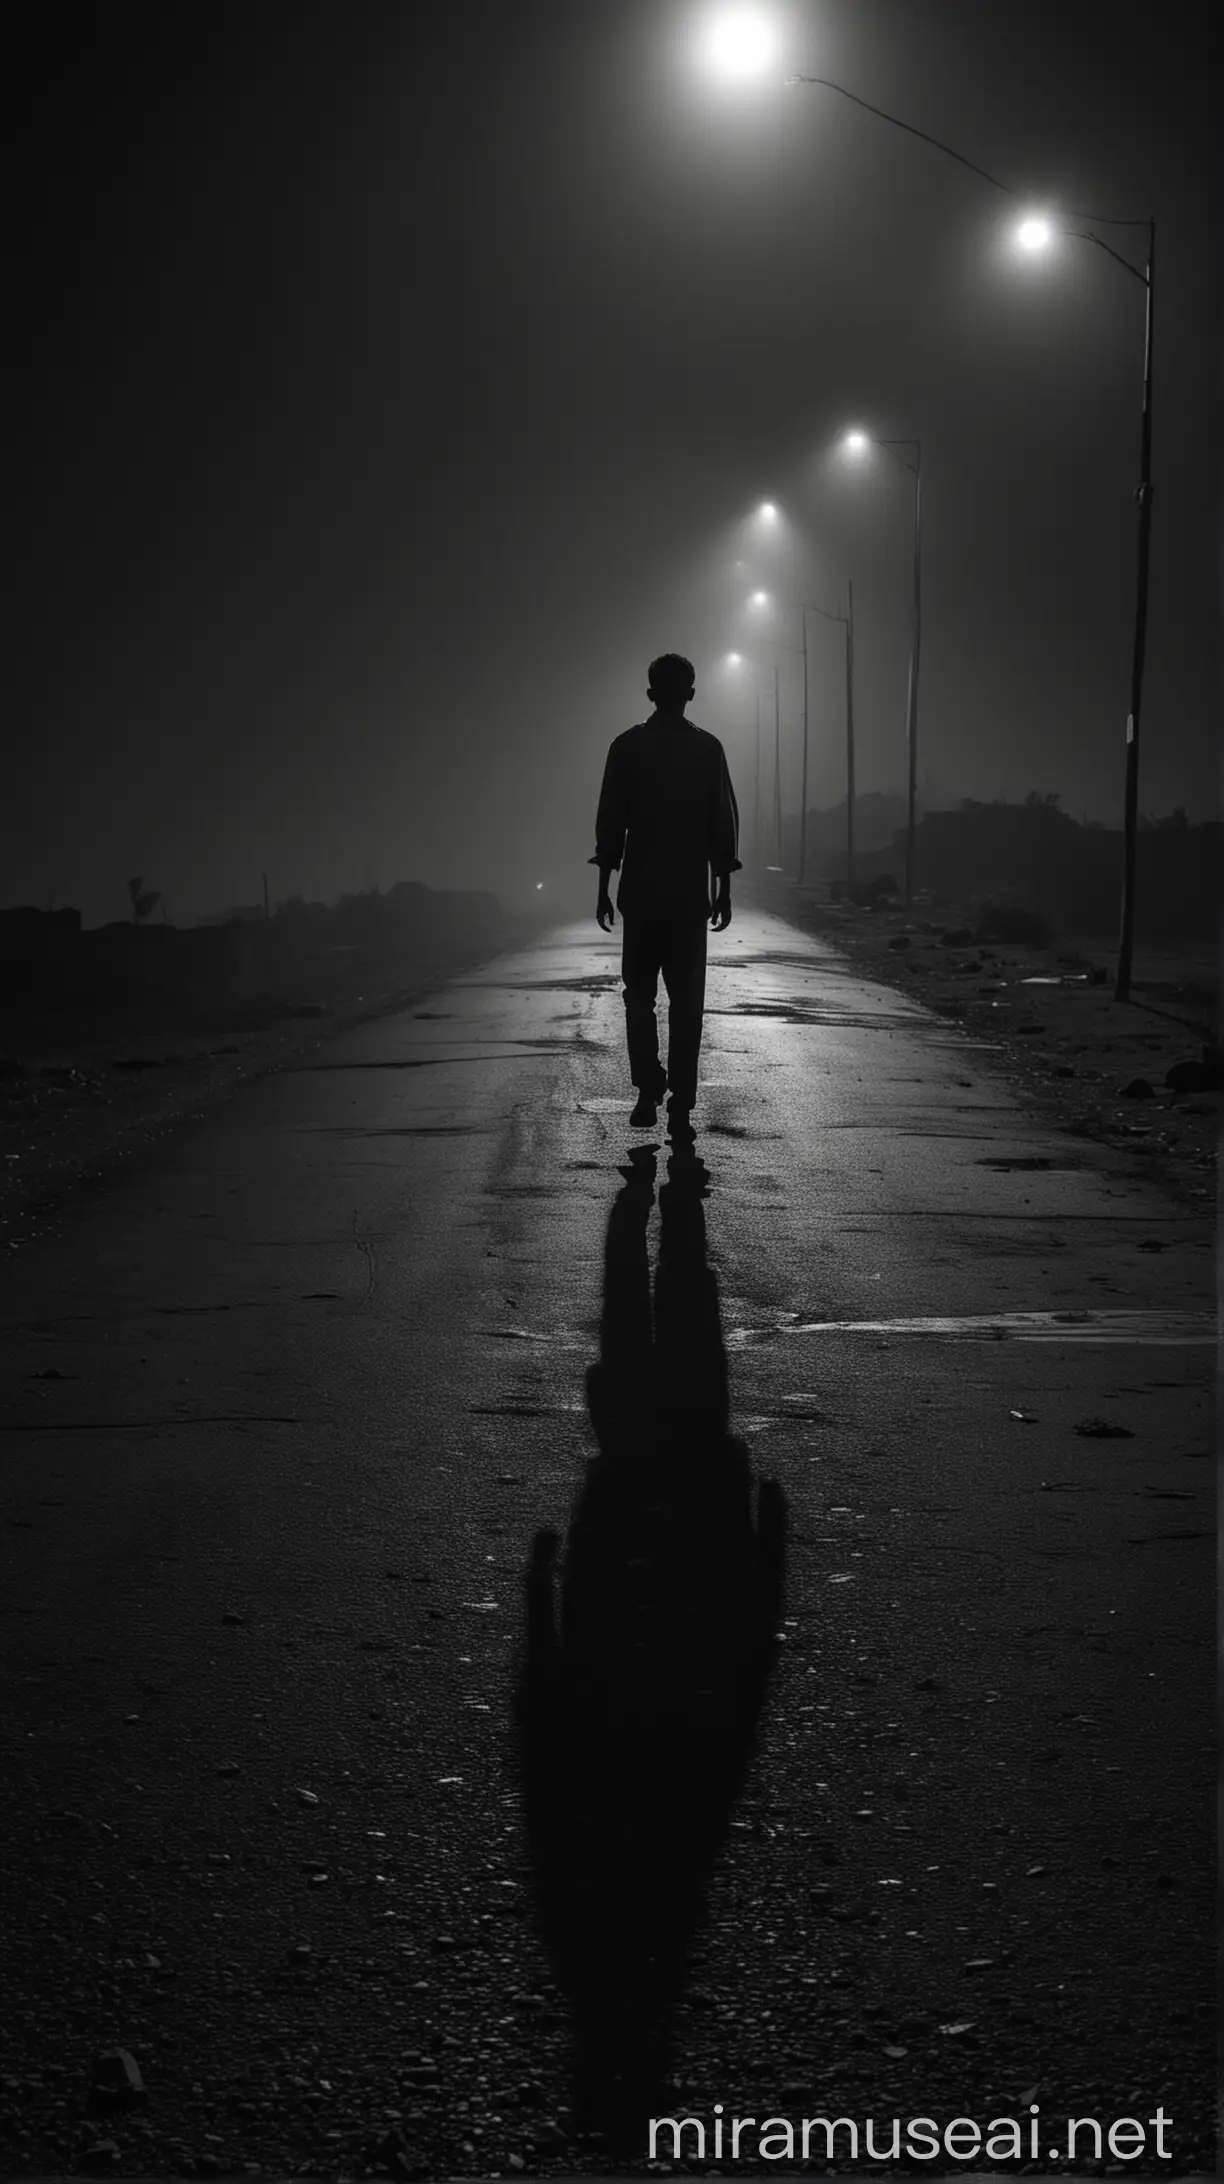  A dark and eerie night with a long, deserted road stretching into the distance. Sparse, dim streetlights cast long shadows, and a single figure, Vishal, walks alone, surrounded by an ominous atmosphere.